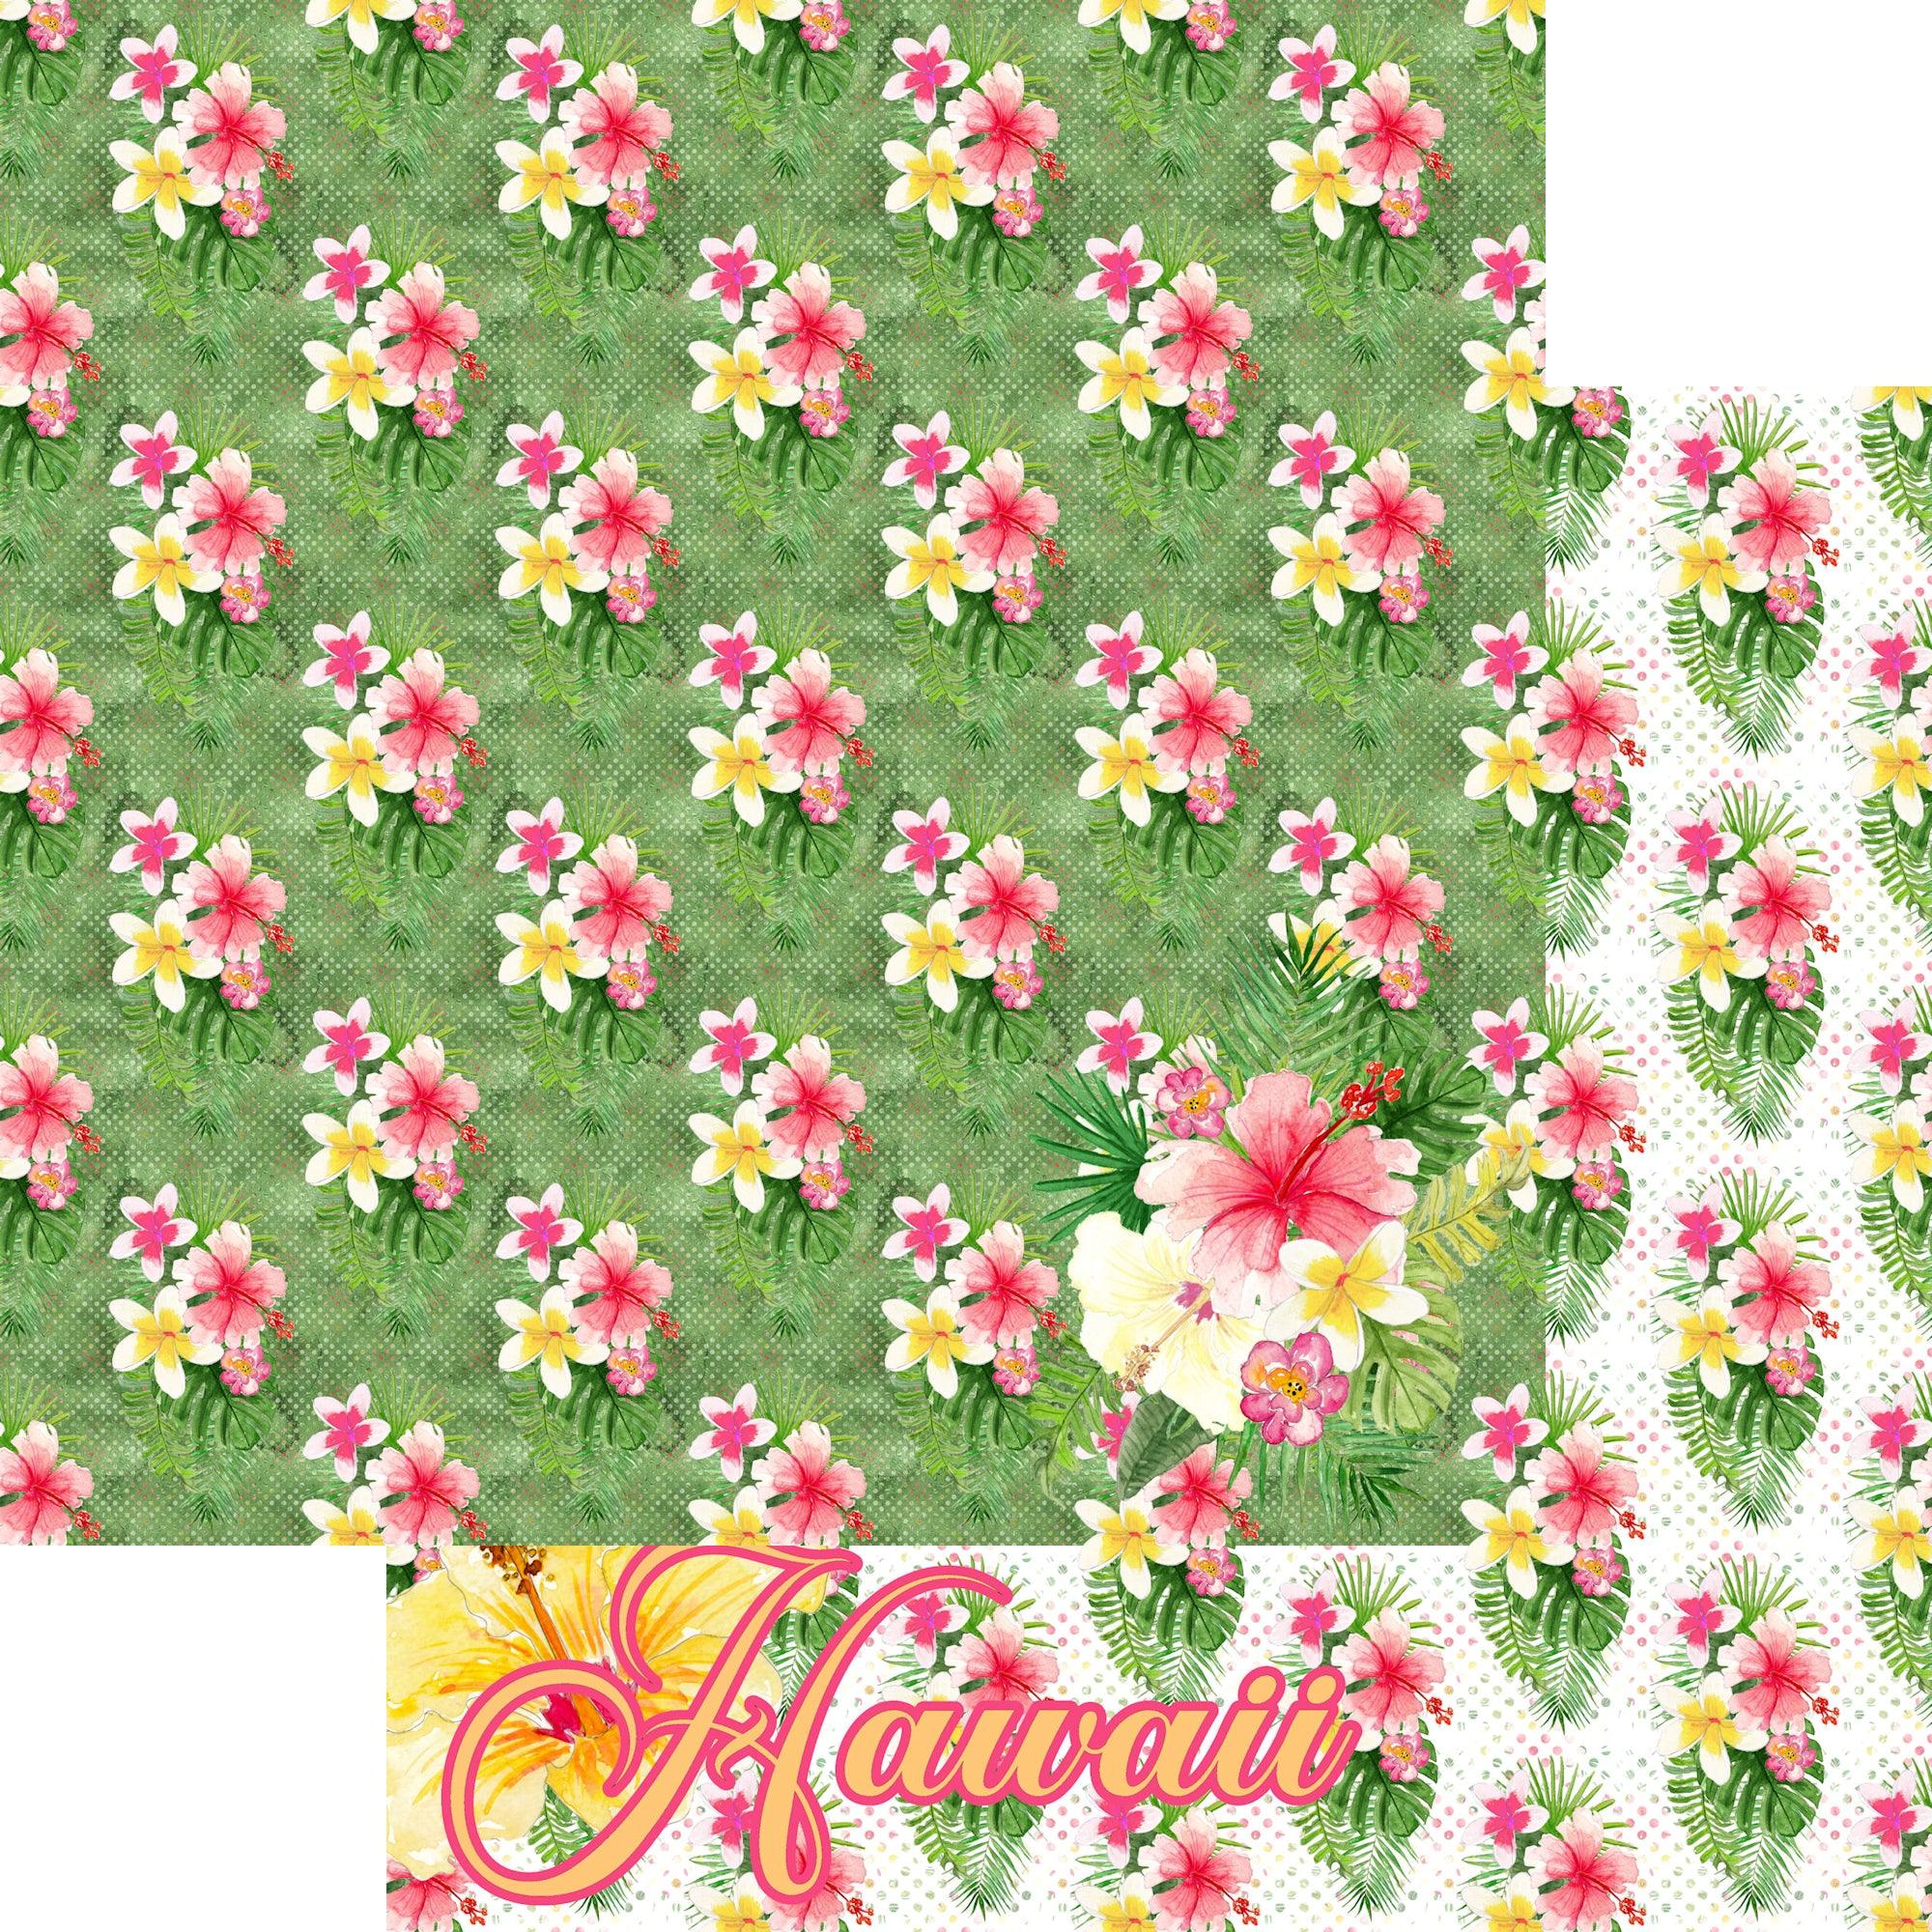 Aloha, Hawaii Collection Hawaii 12 x 12 Double-Sided Scrapbook Paper by SSC Designs - Scrapbook Supply Companies